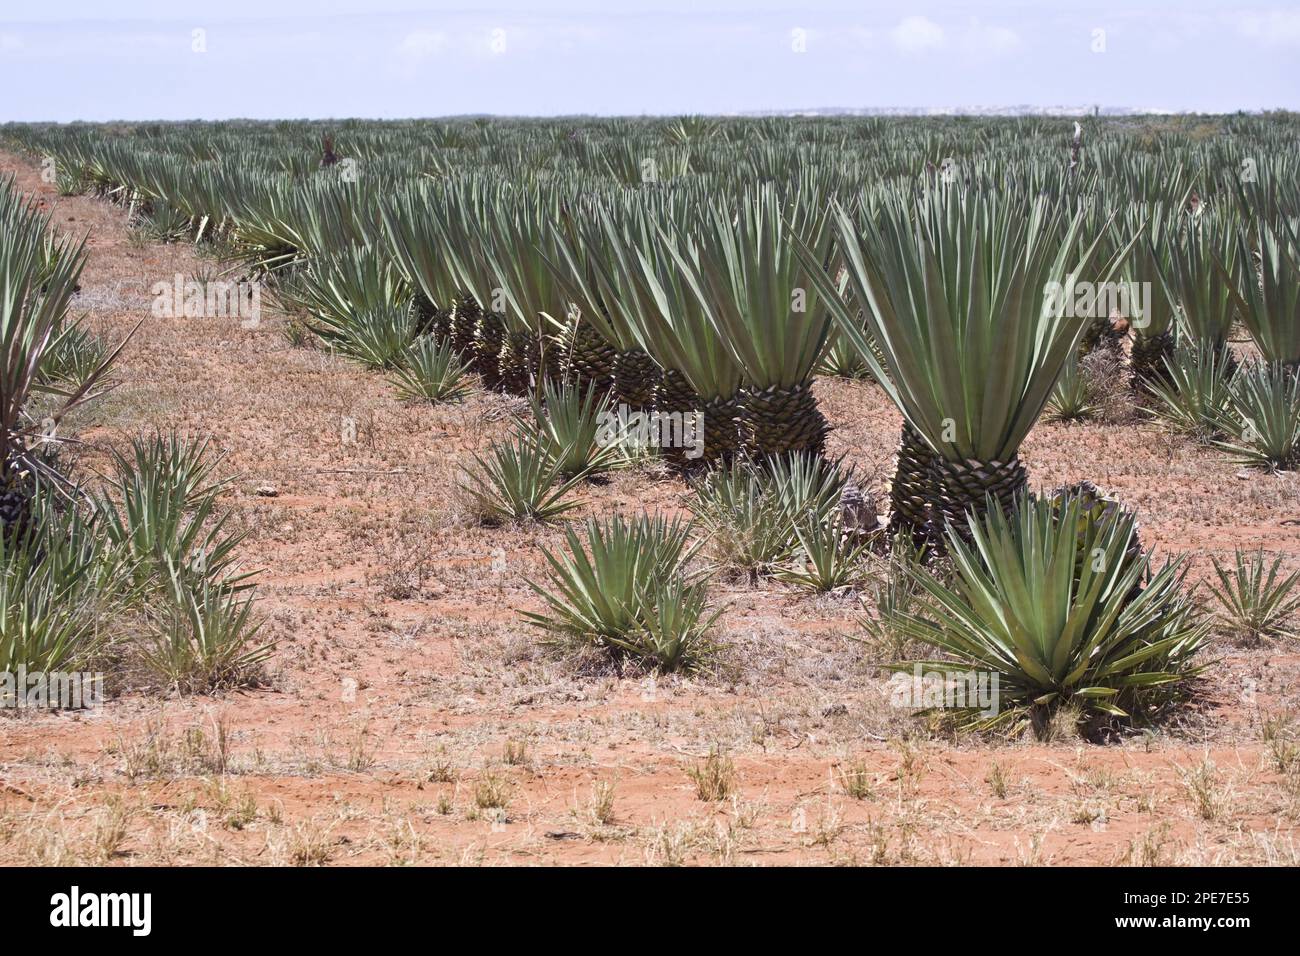 Sisal (Agave Sisalana) is an sisal that yields a stiff fibre traditionally used to make twine and rope, Madagascar Stock Photo